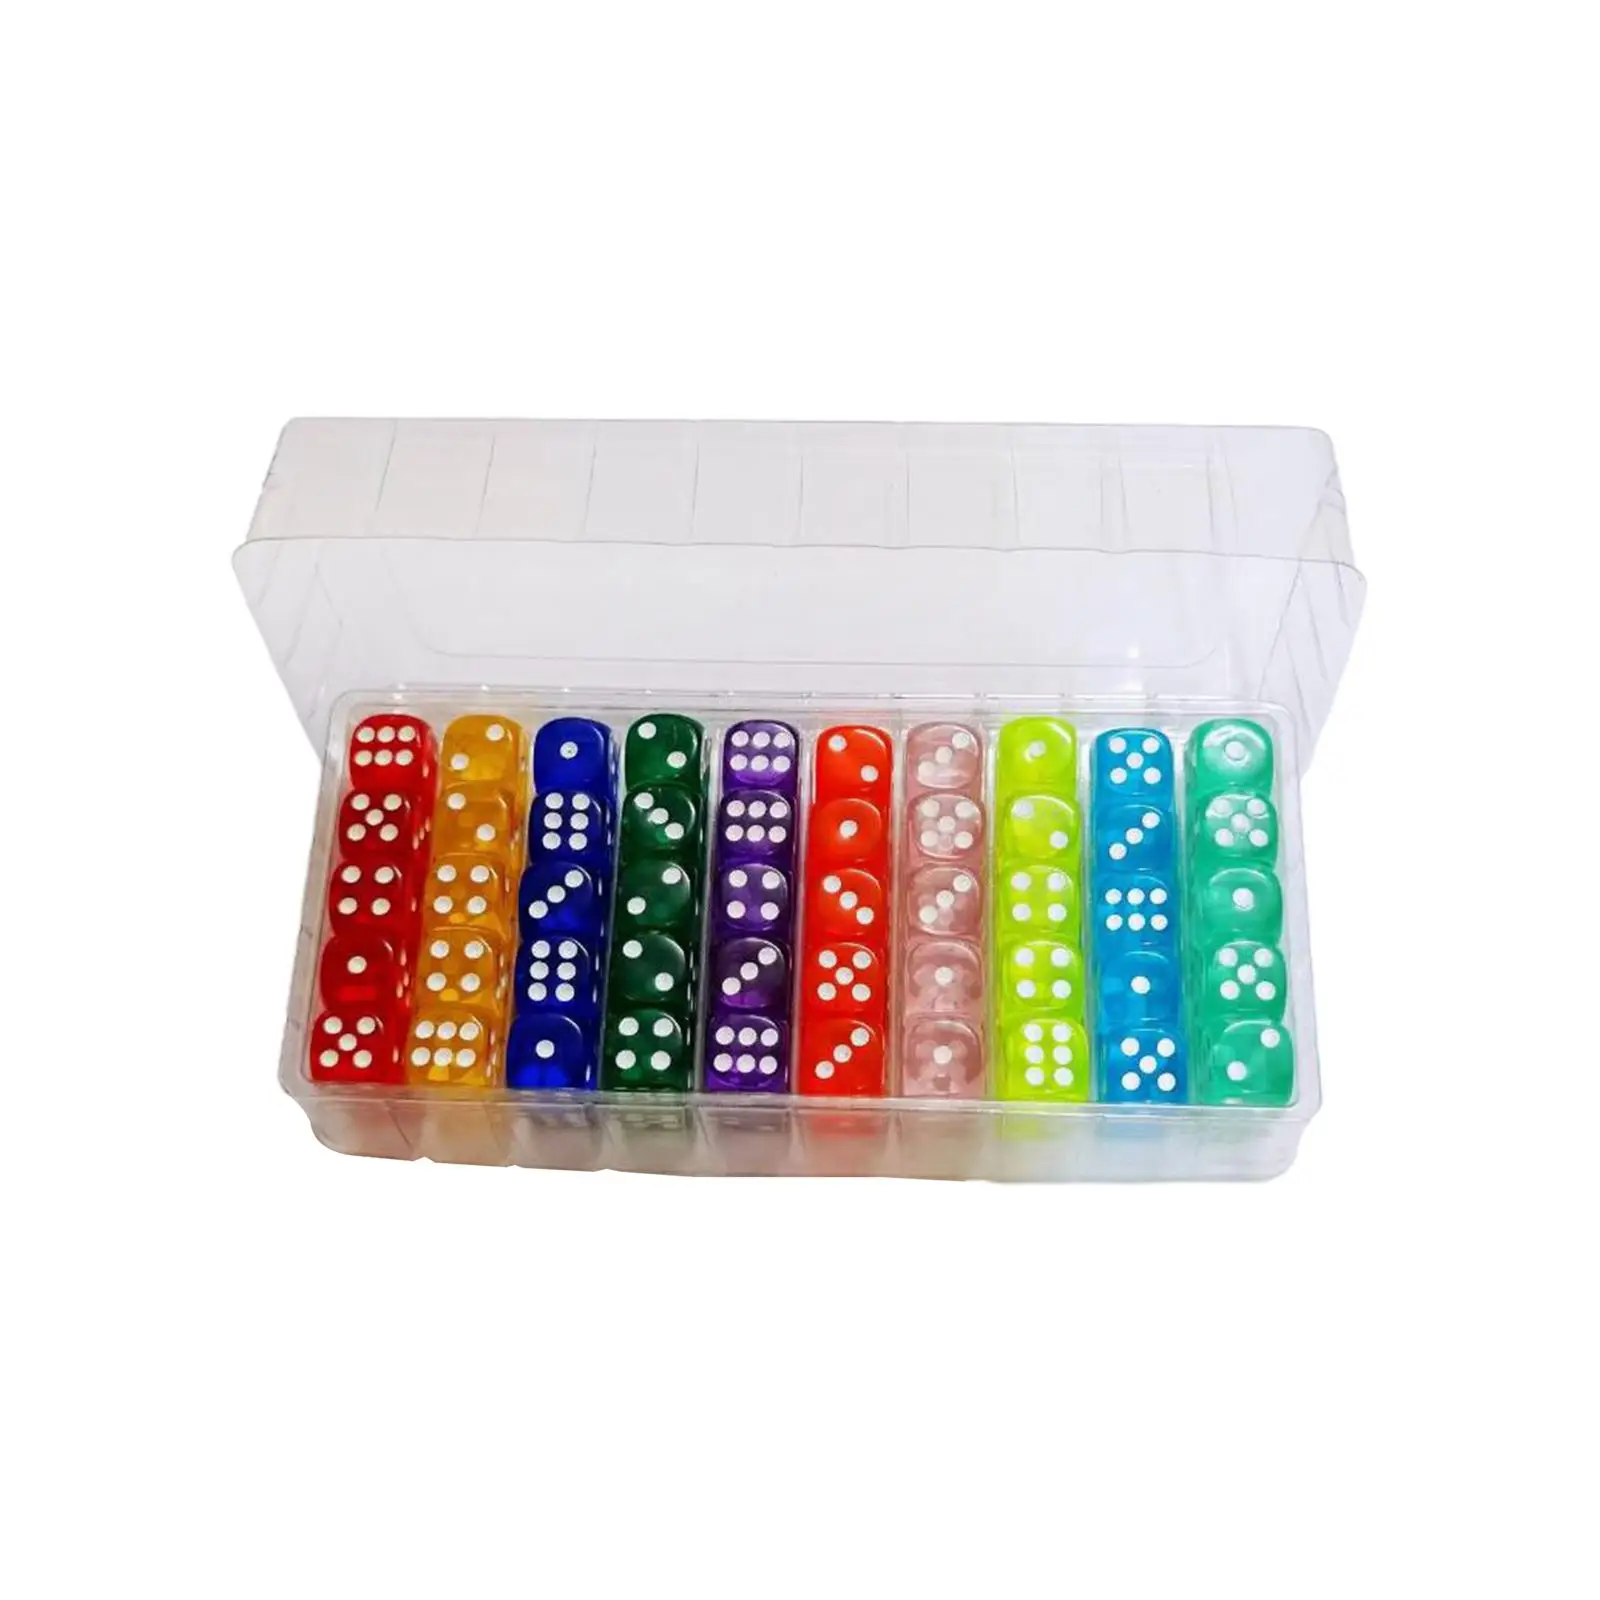 100 Pieces 6 Sided Dice Rounded Edges Acrylic Bulk Dice for Board Games Math Learning Classroom